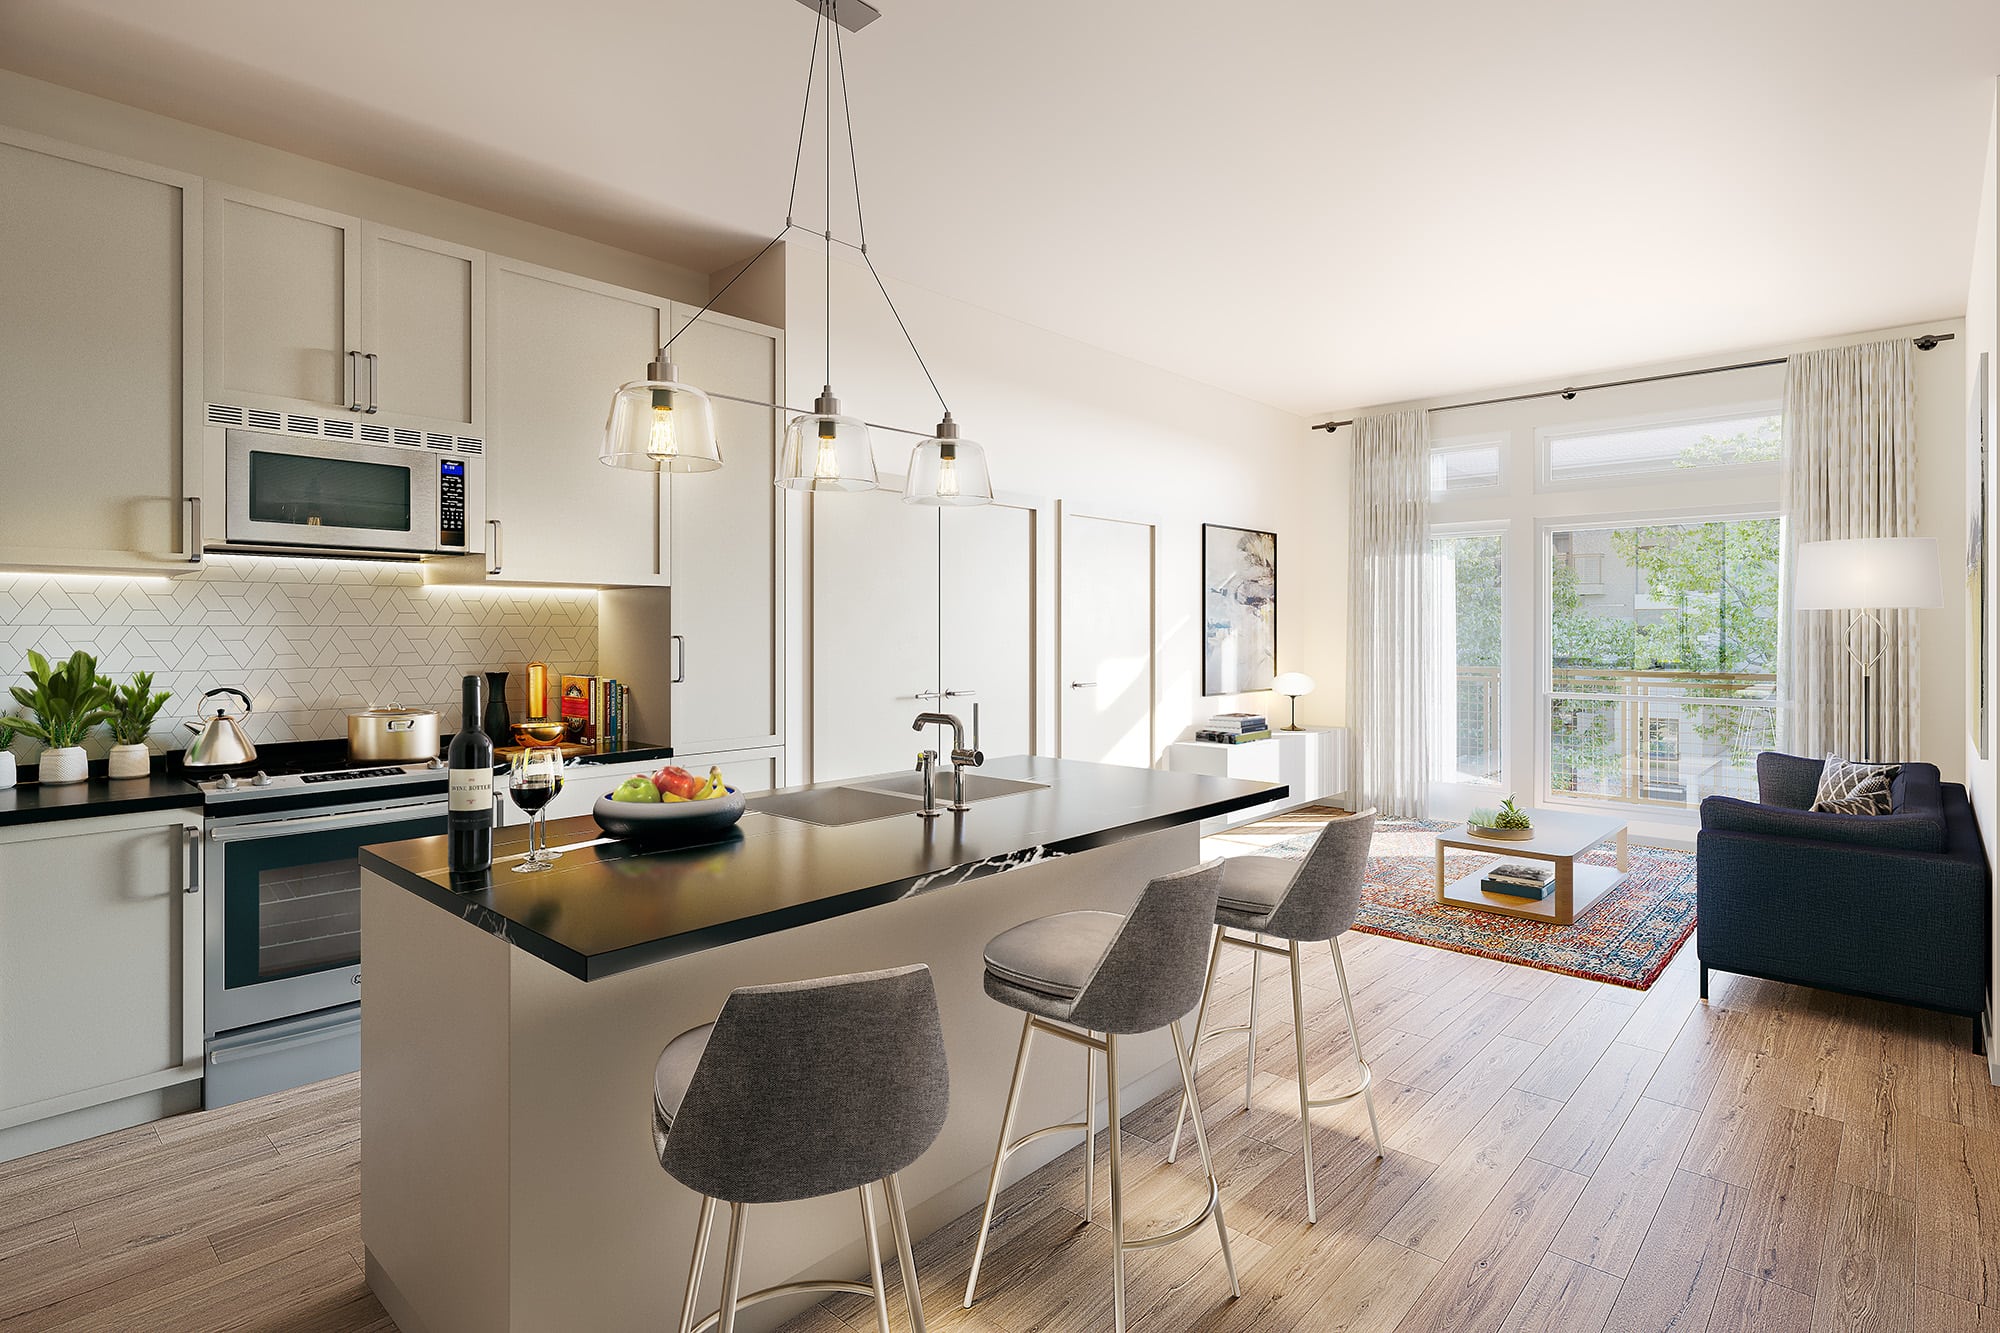 Luxury Apartments for Rent in Austin, TX - Jovie Belterra - Open Concept Kitchen with Middle Island, Stainless Steel Appliances, Upgraded Hardware and Lighting Fixtures